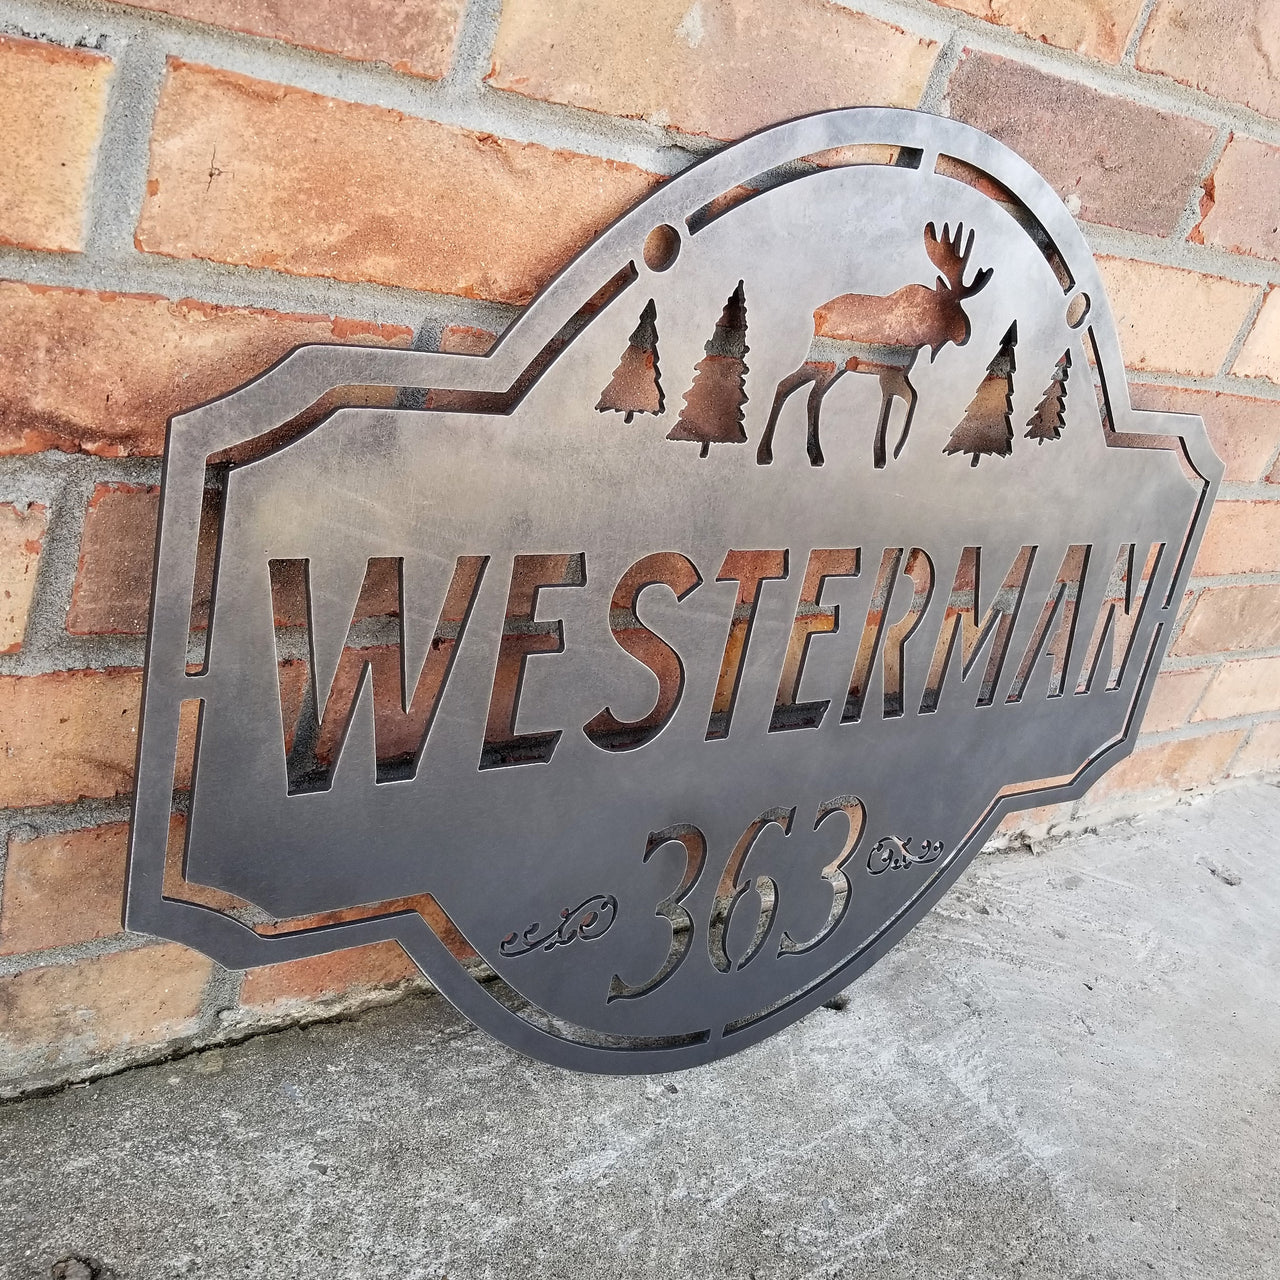 This is a personalized metal address sign that hangs from a hanging bracket mounted to a wooden post.  The sign features a forest scene with a moose in the center. The sign reads, "Westerman 363".